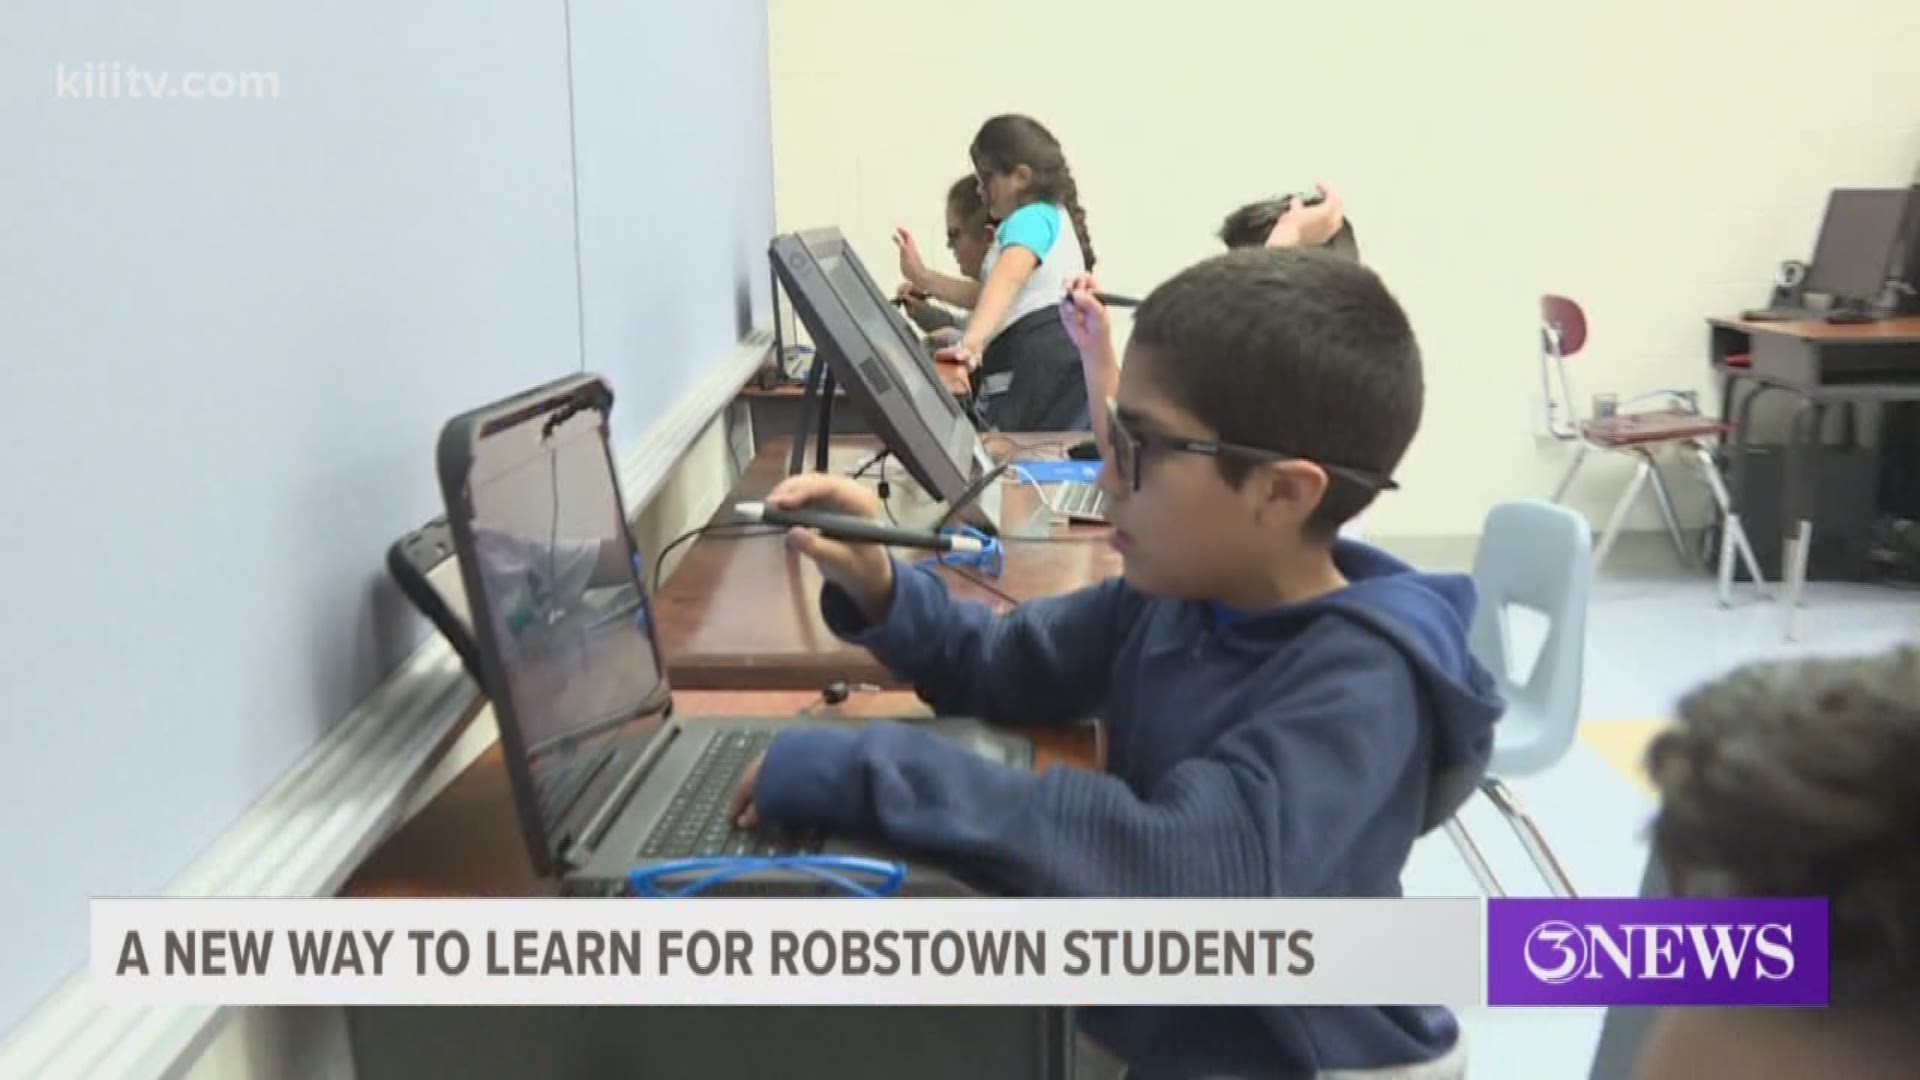 There's some new technology at Robert Driscoll Elementary School in Robstown, Texas, that has students so excited they don't want to go home at the end of the day. I